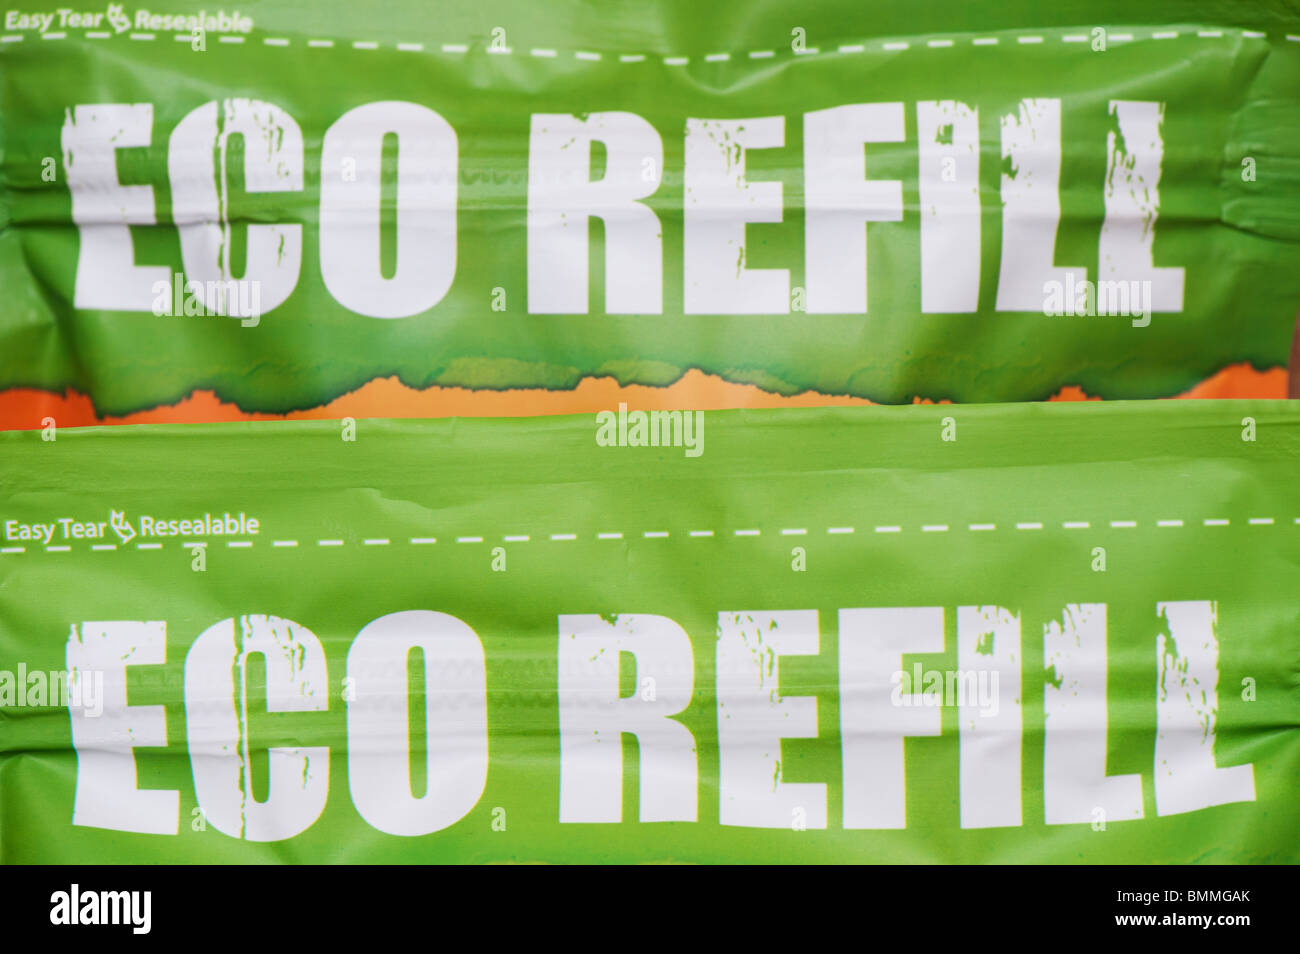 Eco Refill food packet label designed to save landfill waste. UK Stock Photo